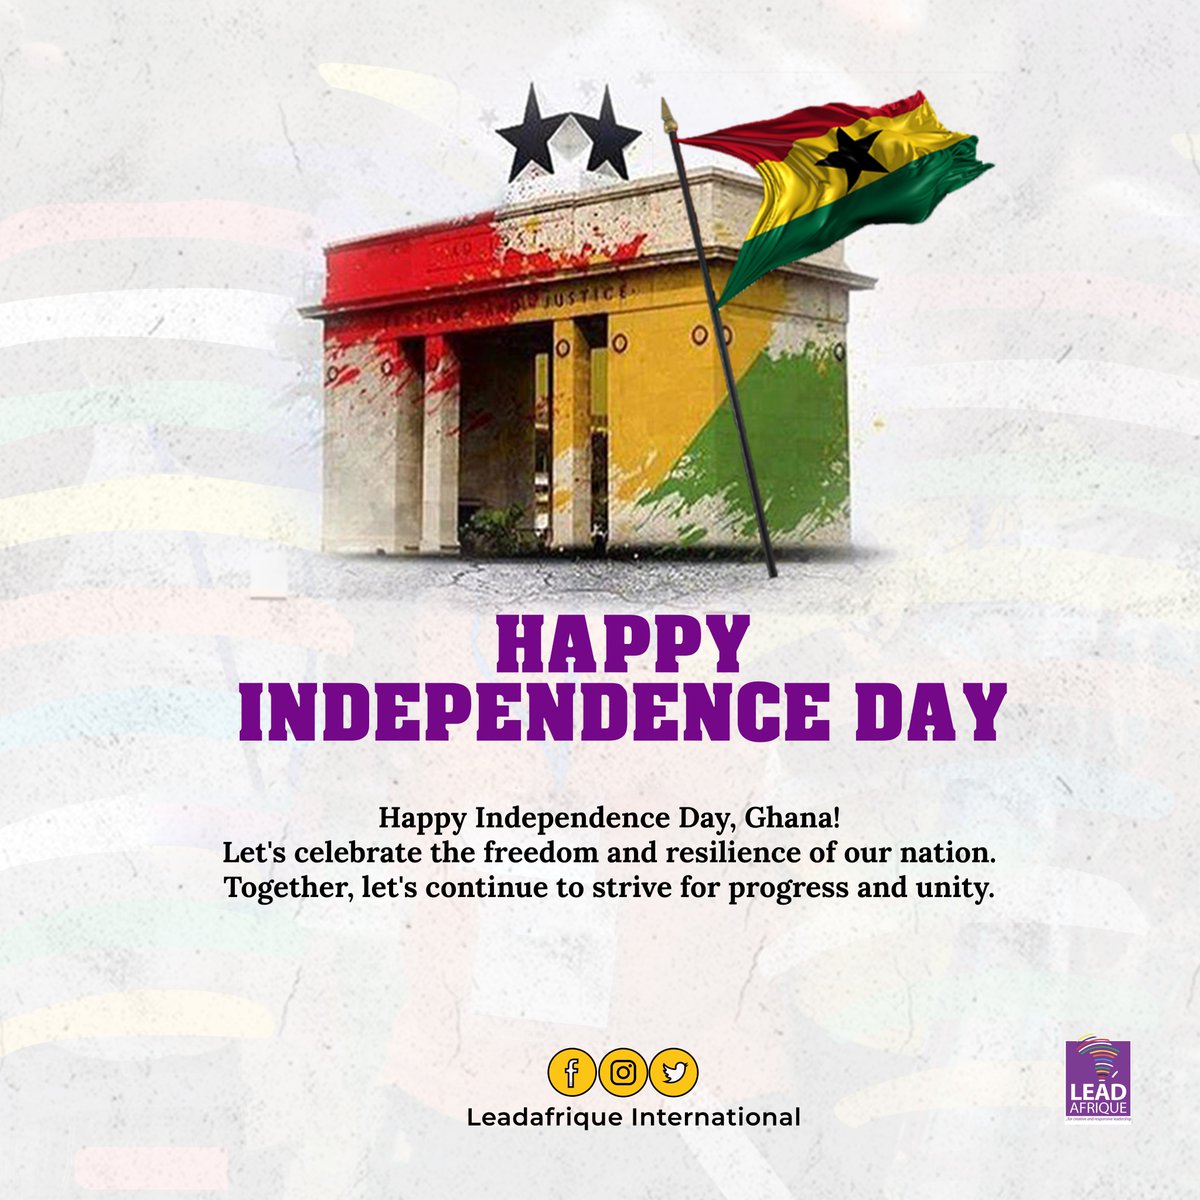 Happy Independence Day! Today, we celebrate the spirit of freedom and unity that defines our nation. Let's honor sacrifices of those who came before us and commit to building a brighter future. Together, let's strive for progress, equality, and prosperity for all. #Freedom #Ghana